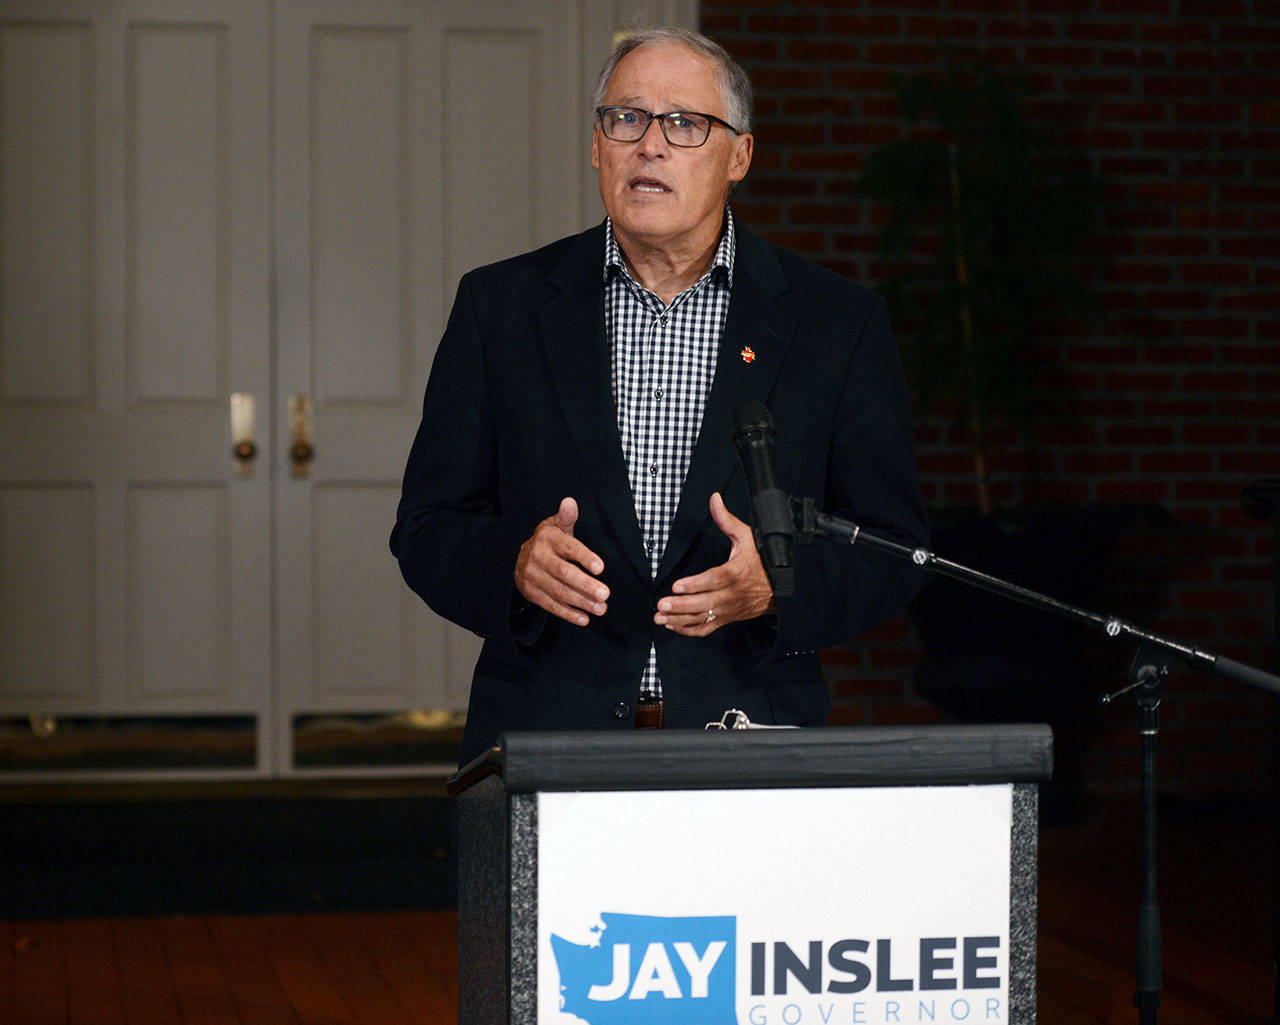 Gov. Jay Inslee thanks the voters of Washington state after winning his third term Tuesday, Nov. 3, 2020 in Olympia. (Steve Bloom/The Olympian via AP)